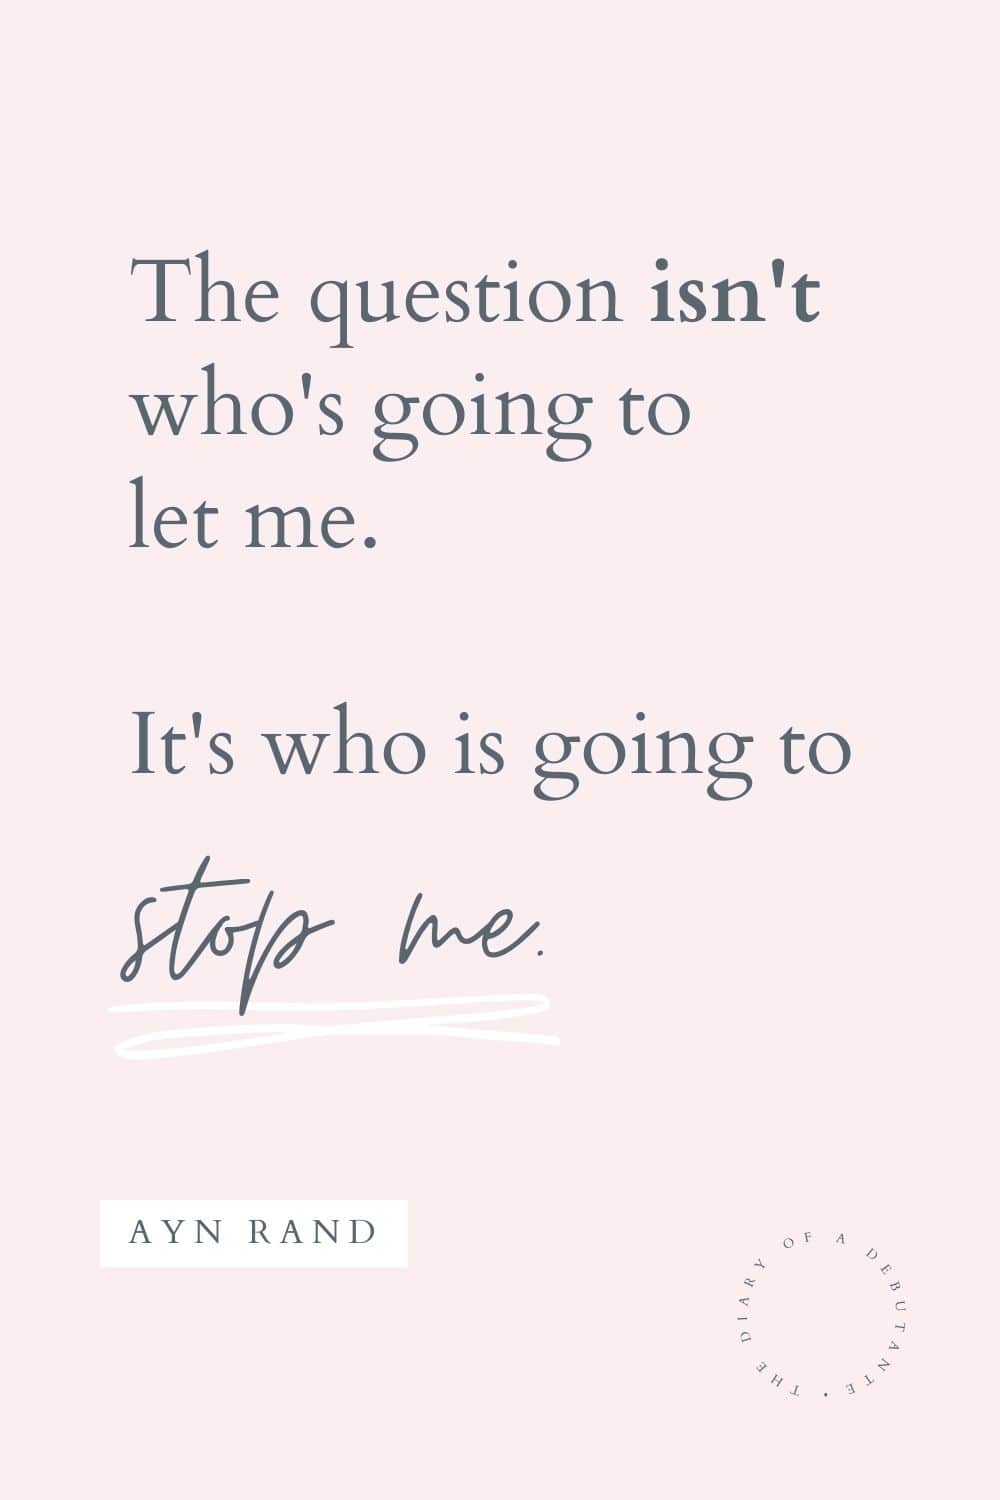 Ayn Rand quote curated as part of a collection of inspirational words of encouragement for women by blogger Stephanie Ziajka on Diary of a Debutante